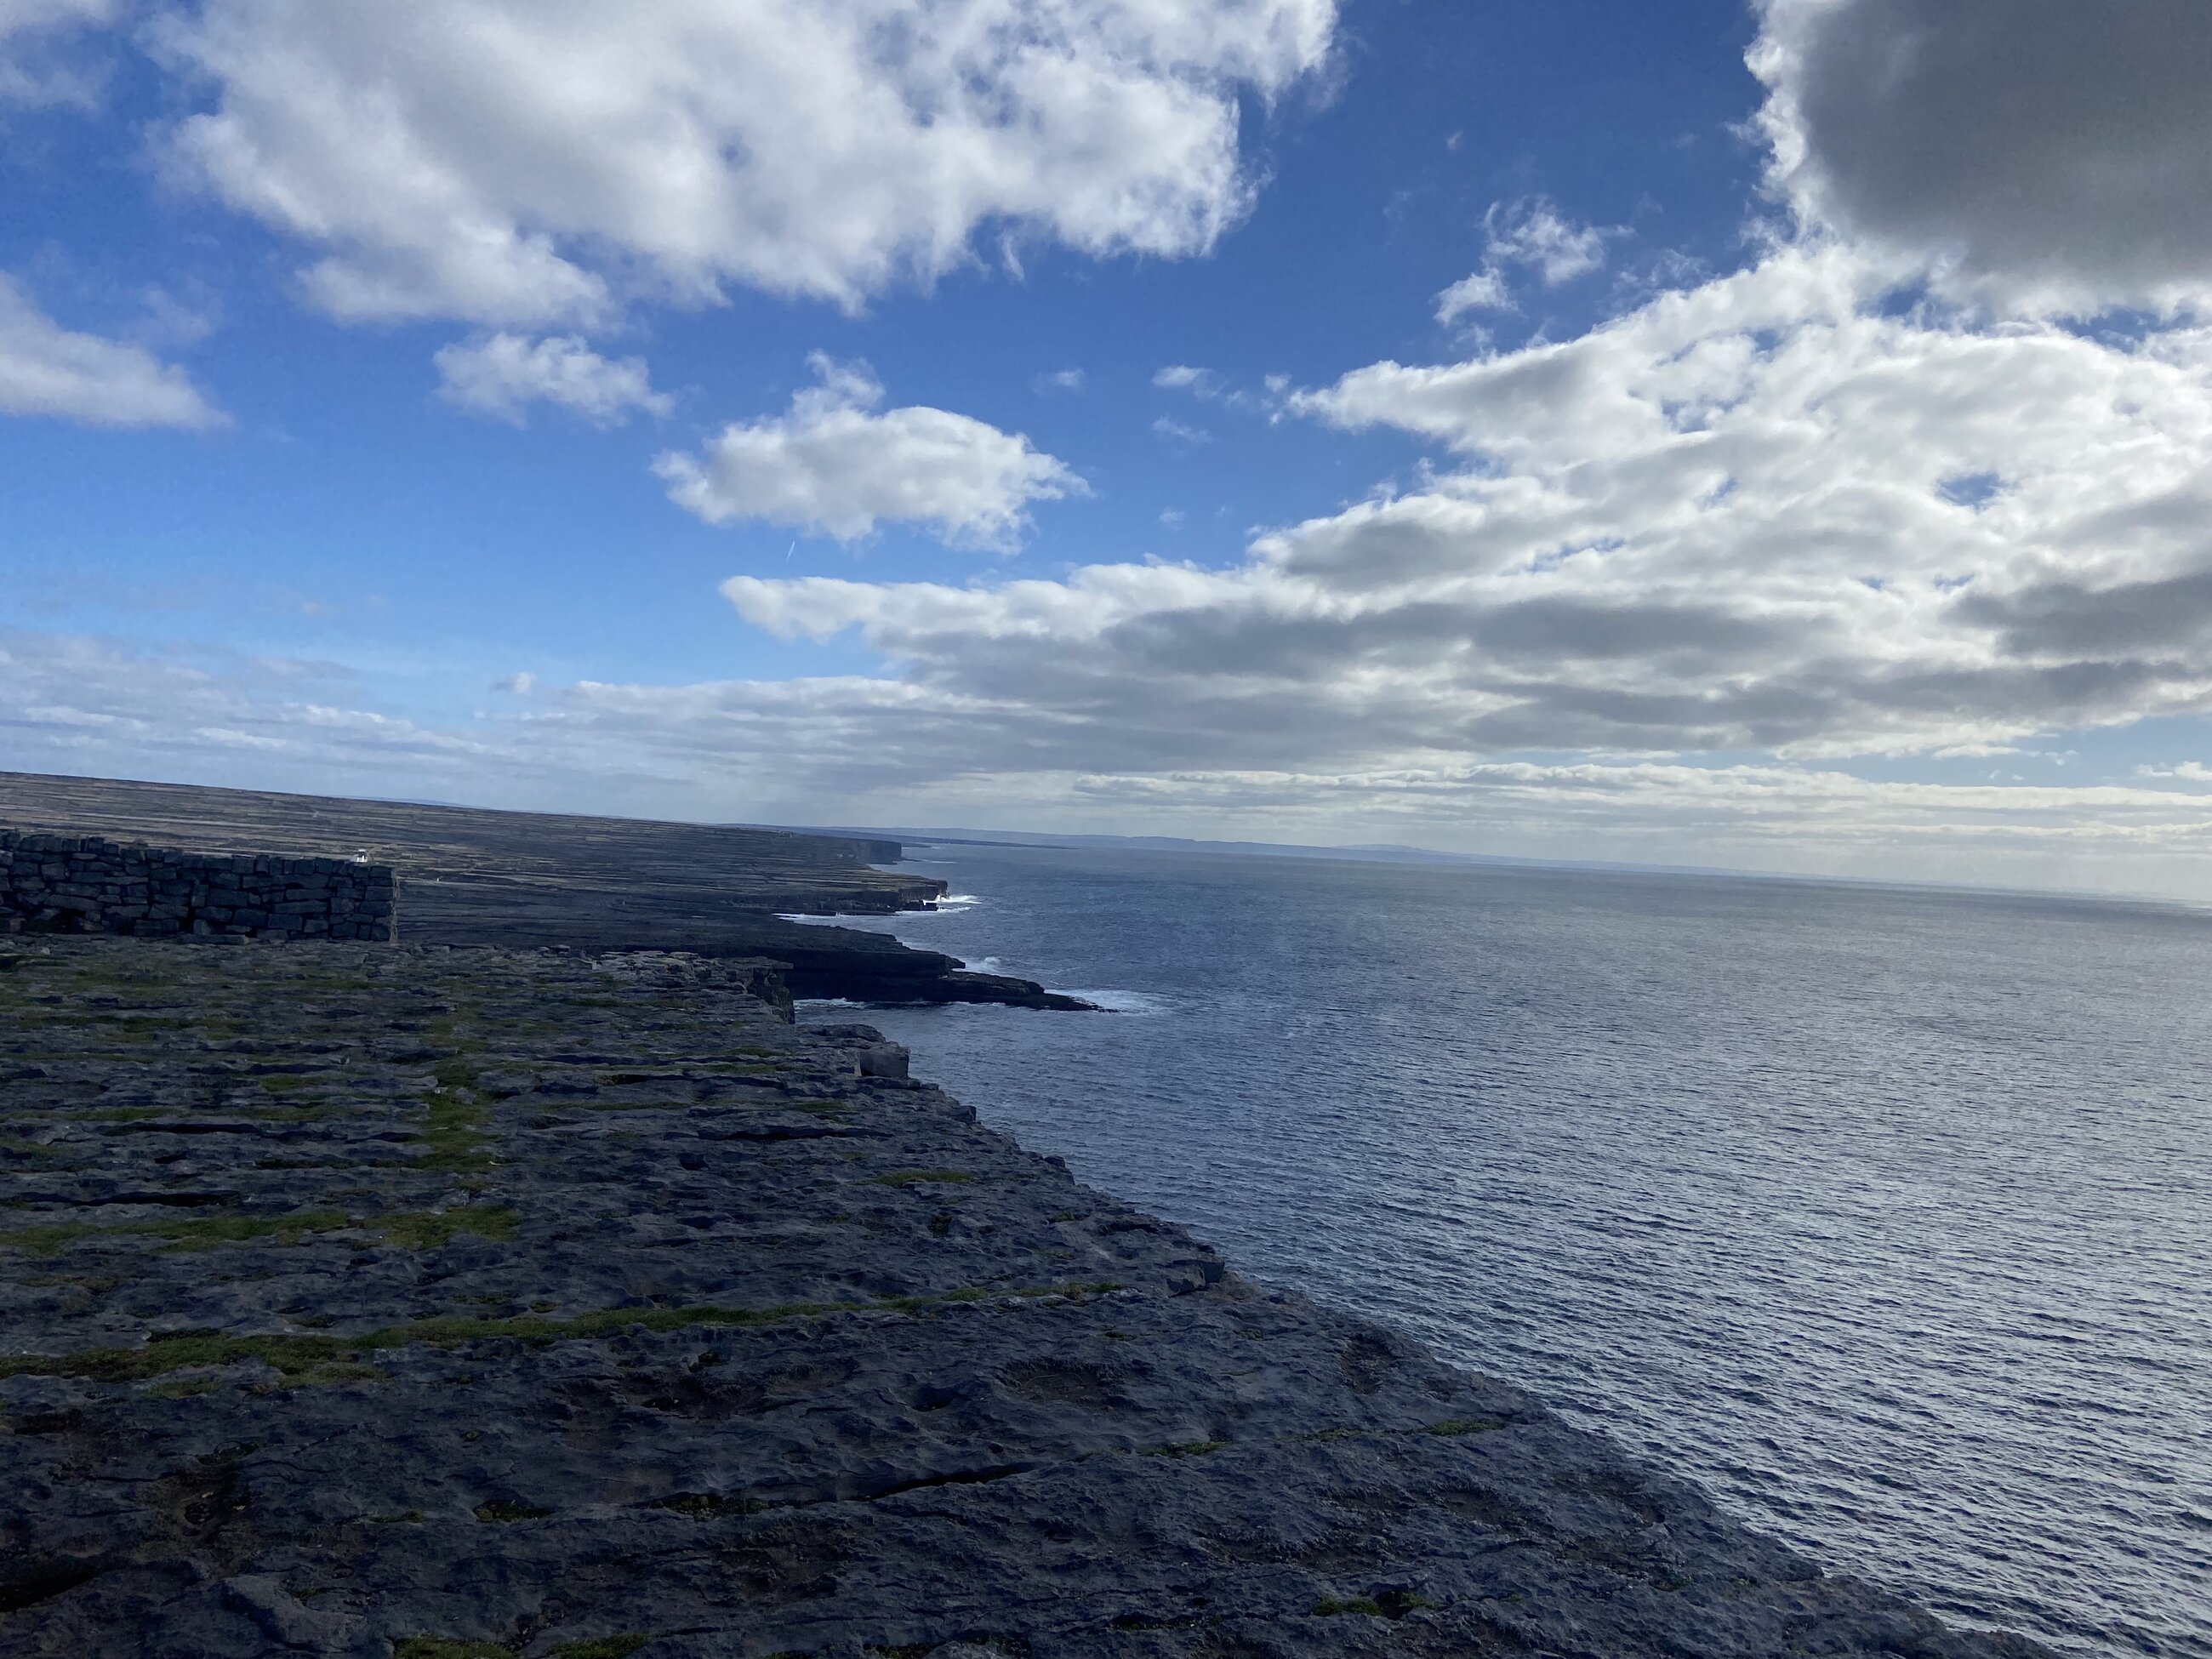 Excursion to the Aran Islands